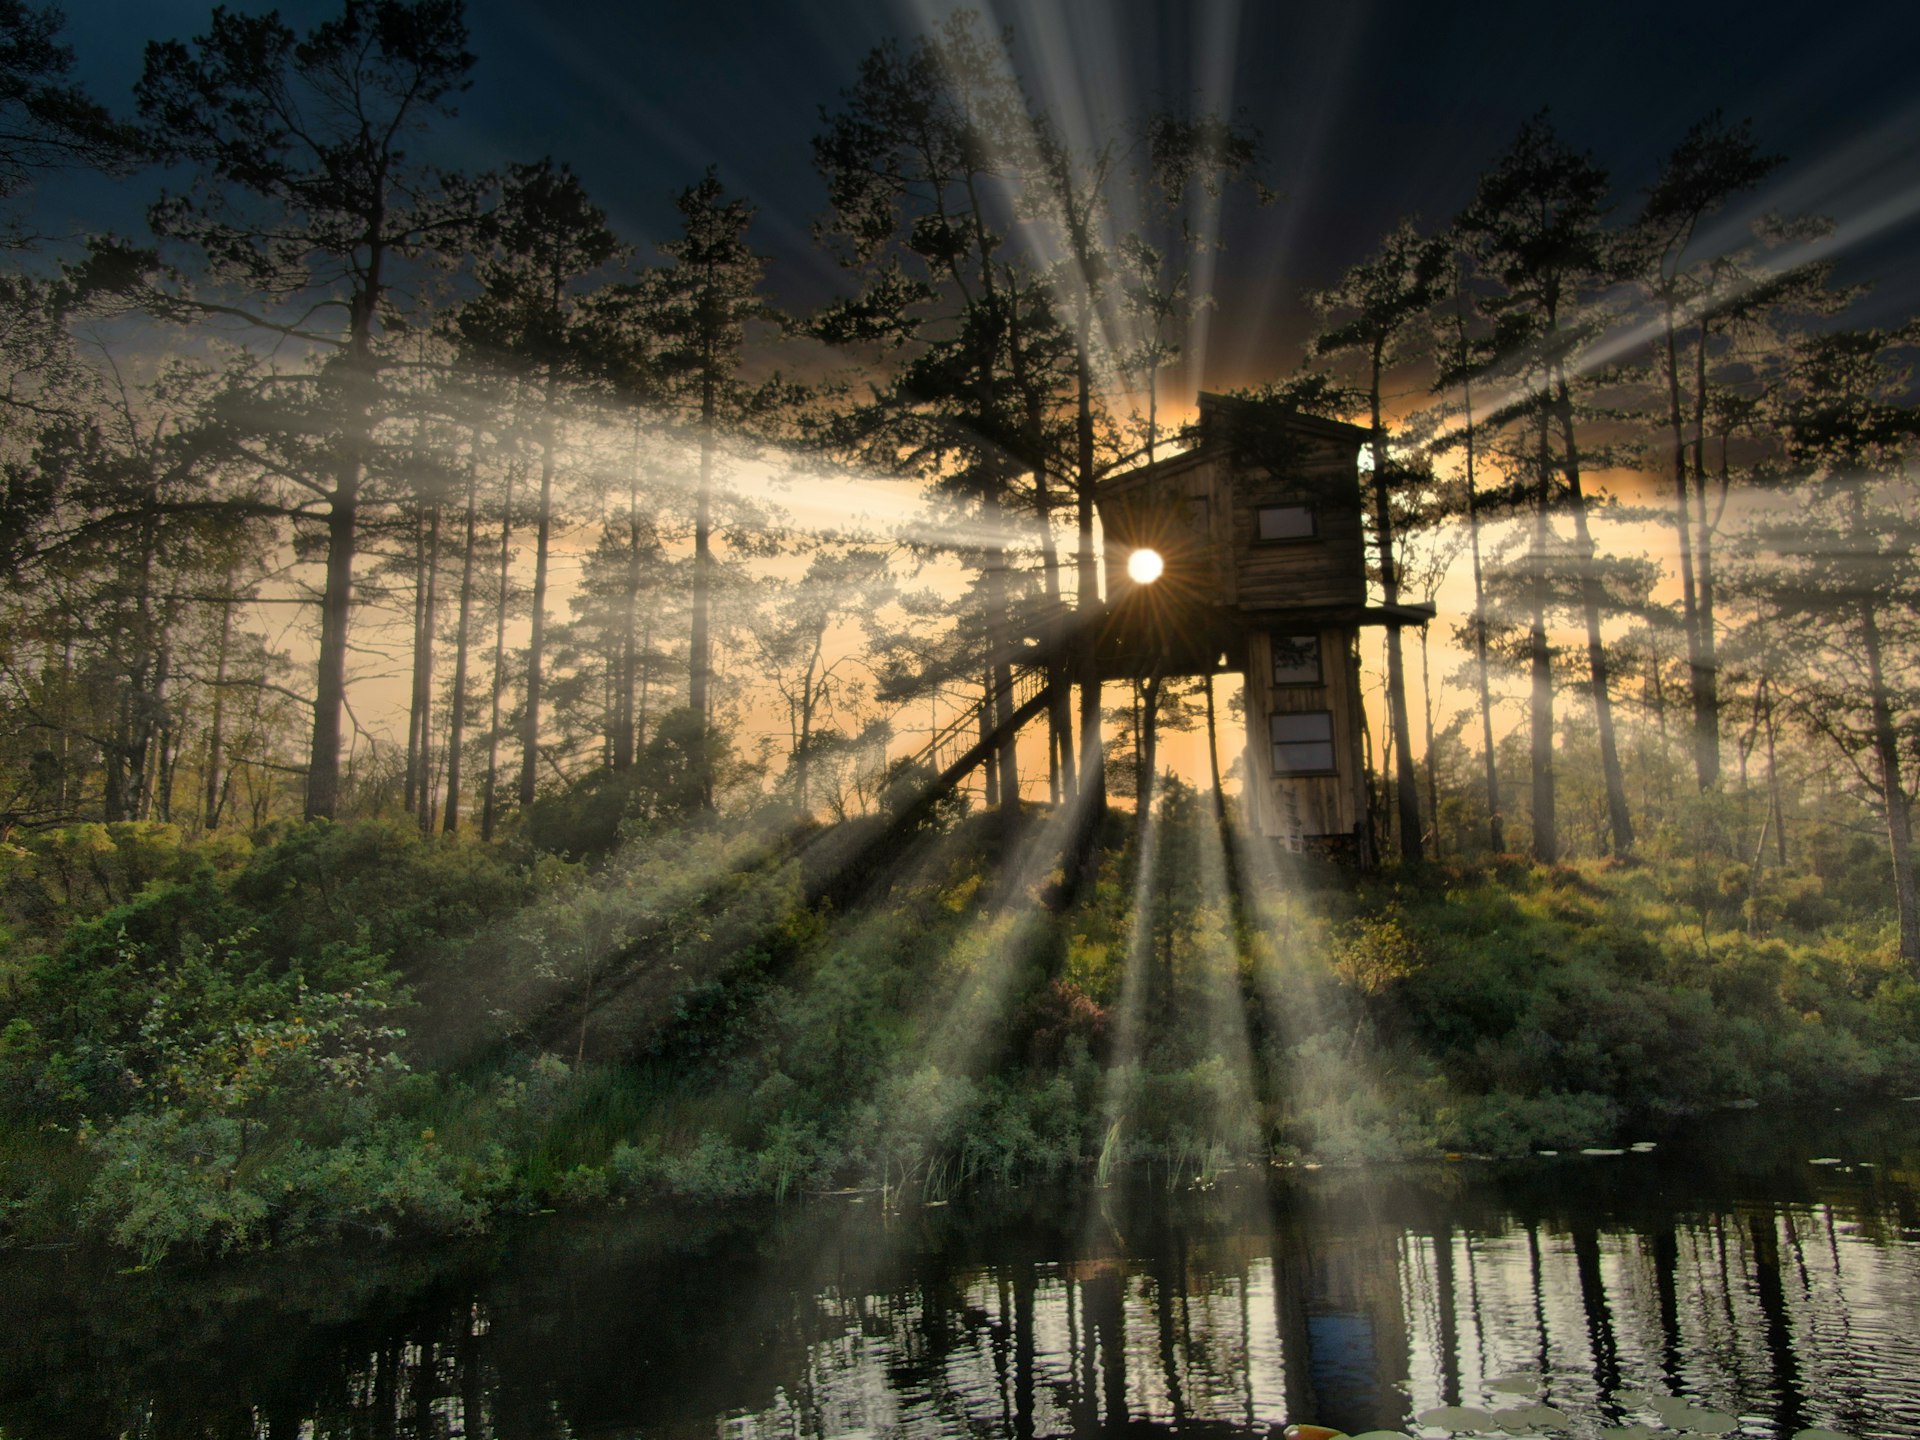 The sun shines behind the woodland, creating a silhouette of a cabin on stilts at the edge of a lake